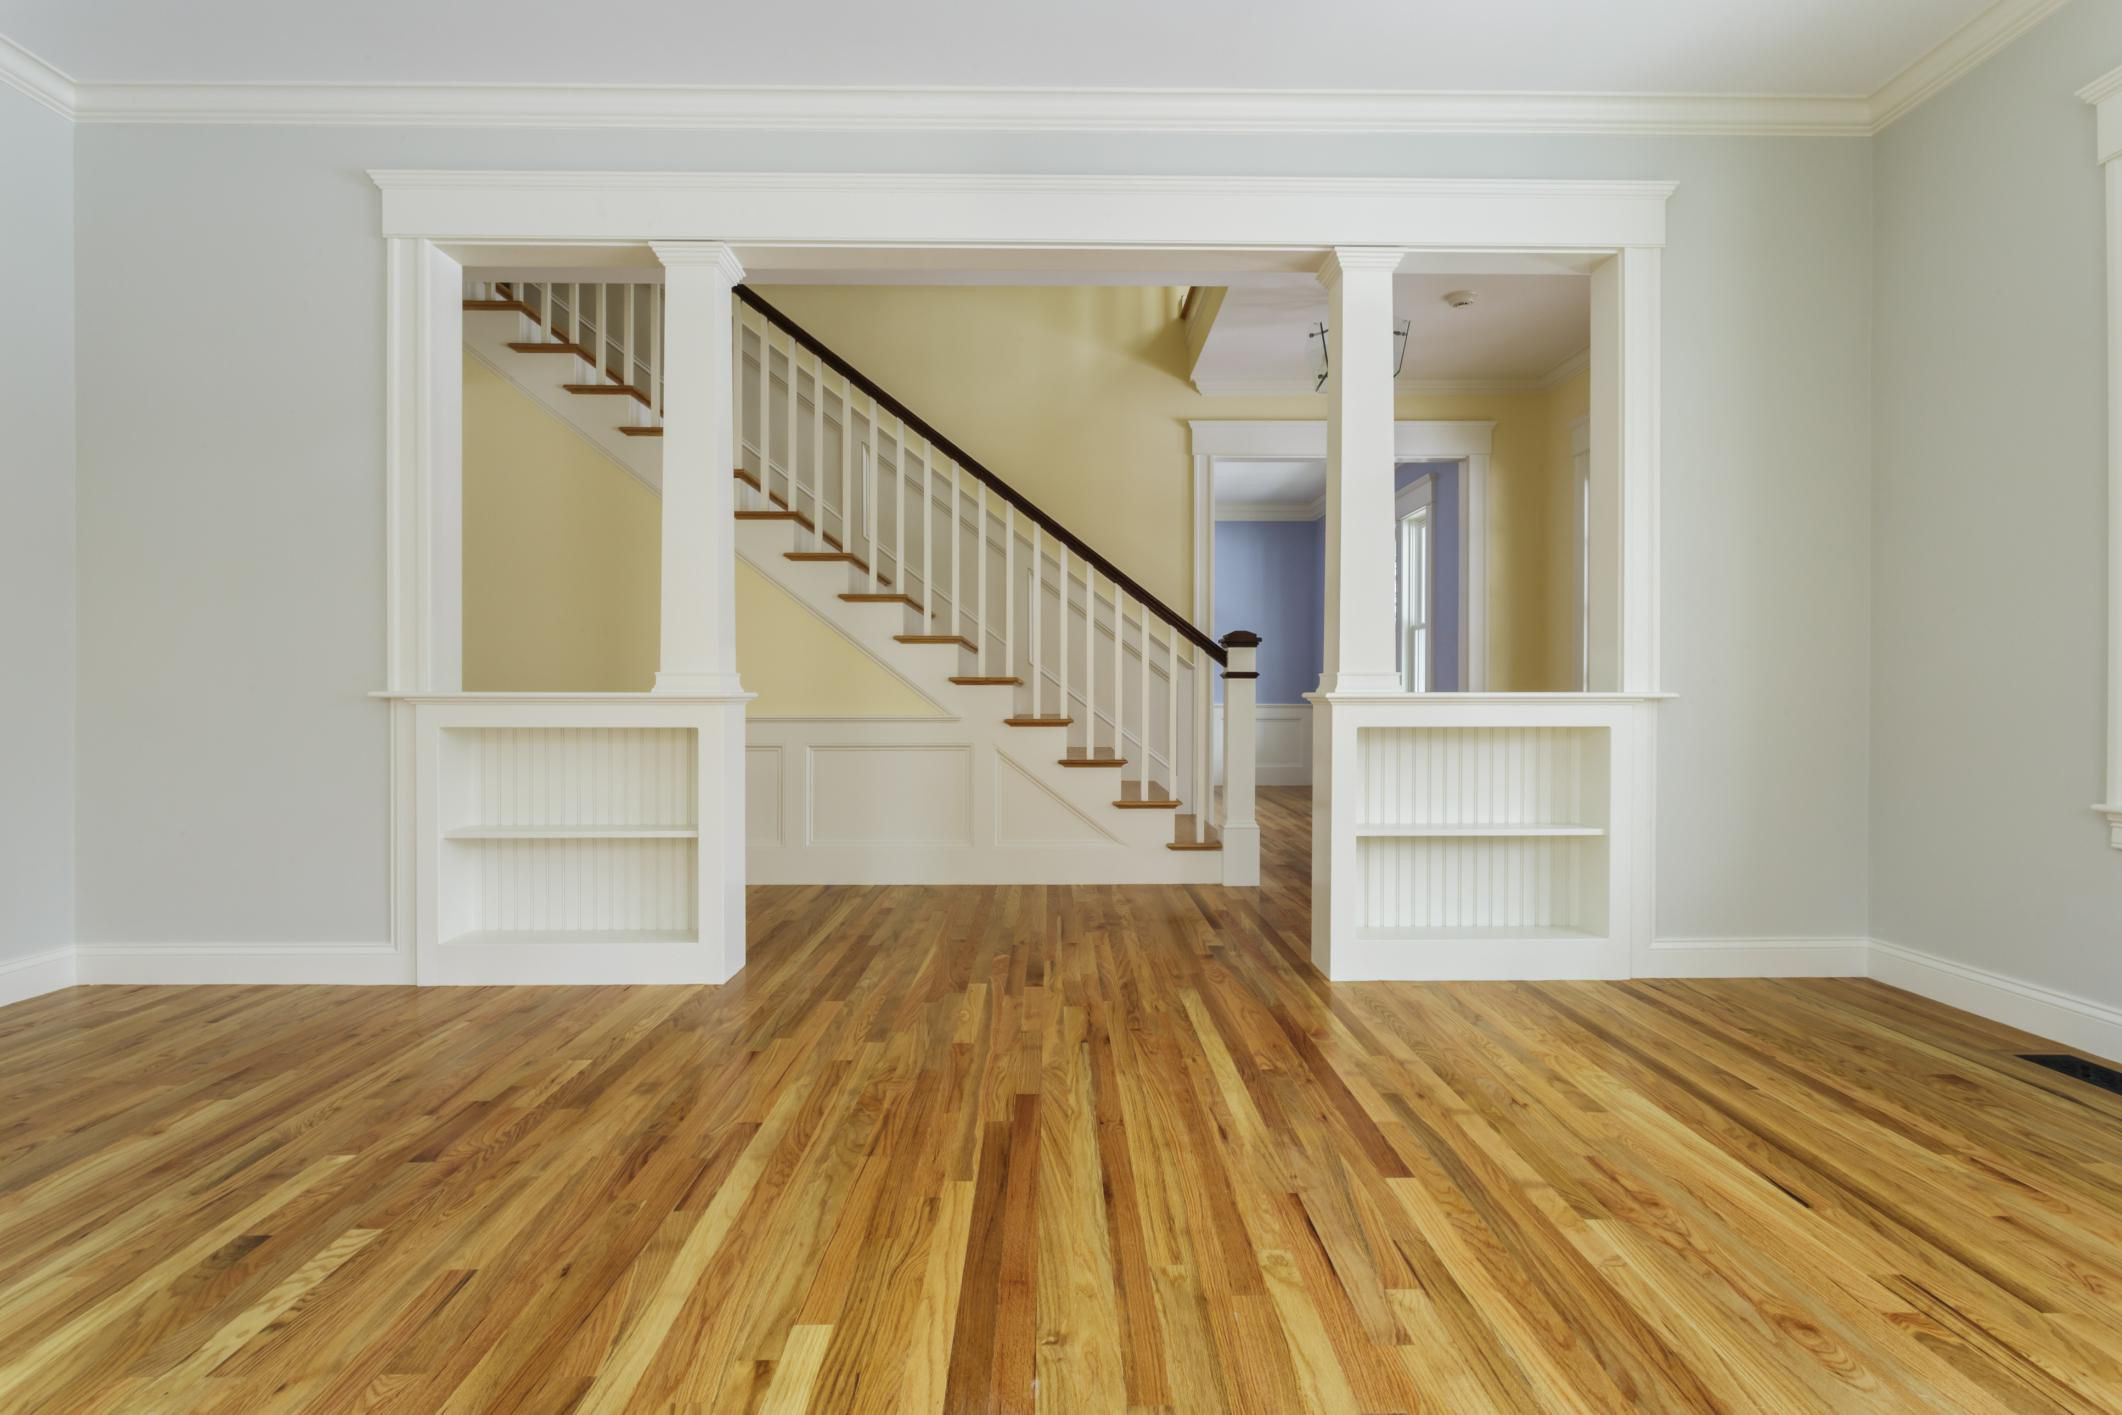 How to Choose Hardwood Floor Stain Color Of Guide to solid Hardwood Floors with 168686571 56a49f213df78cf772834e24